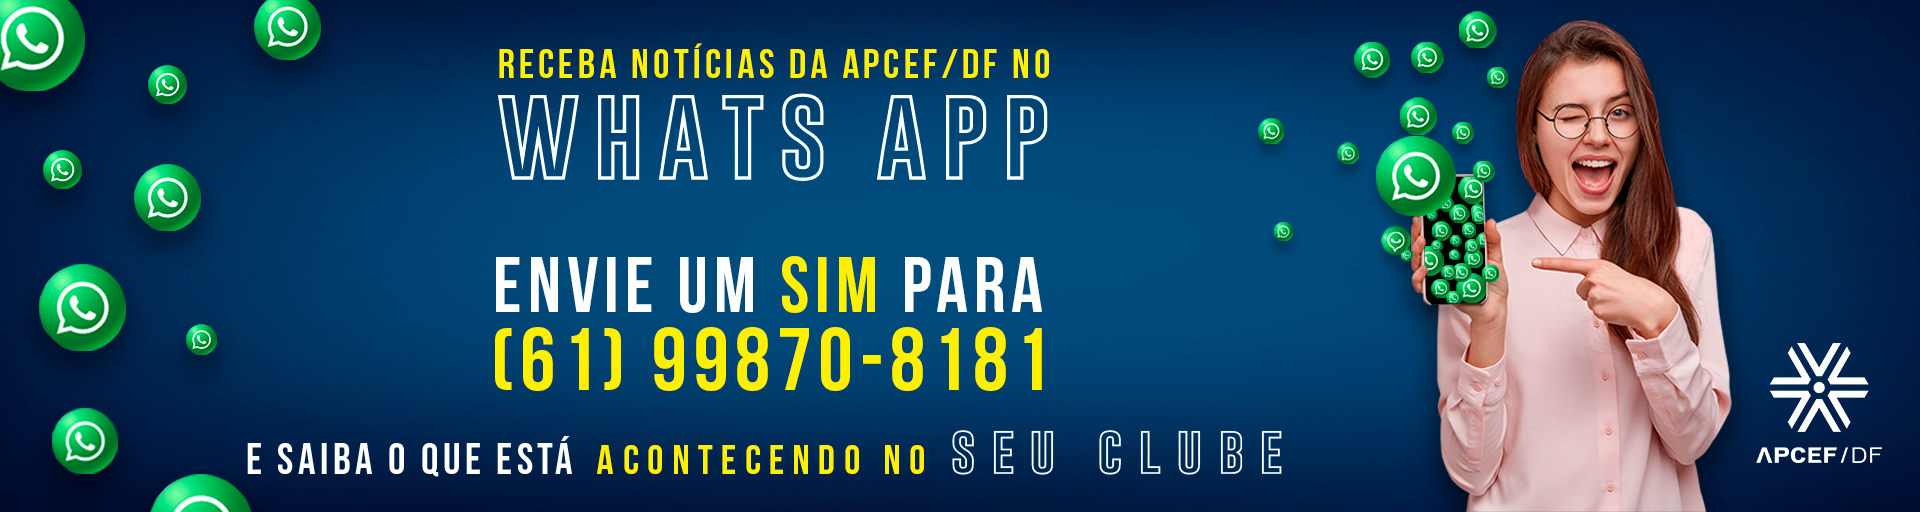 whats-app-1920x520.png